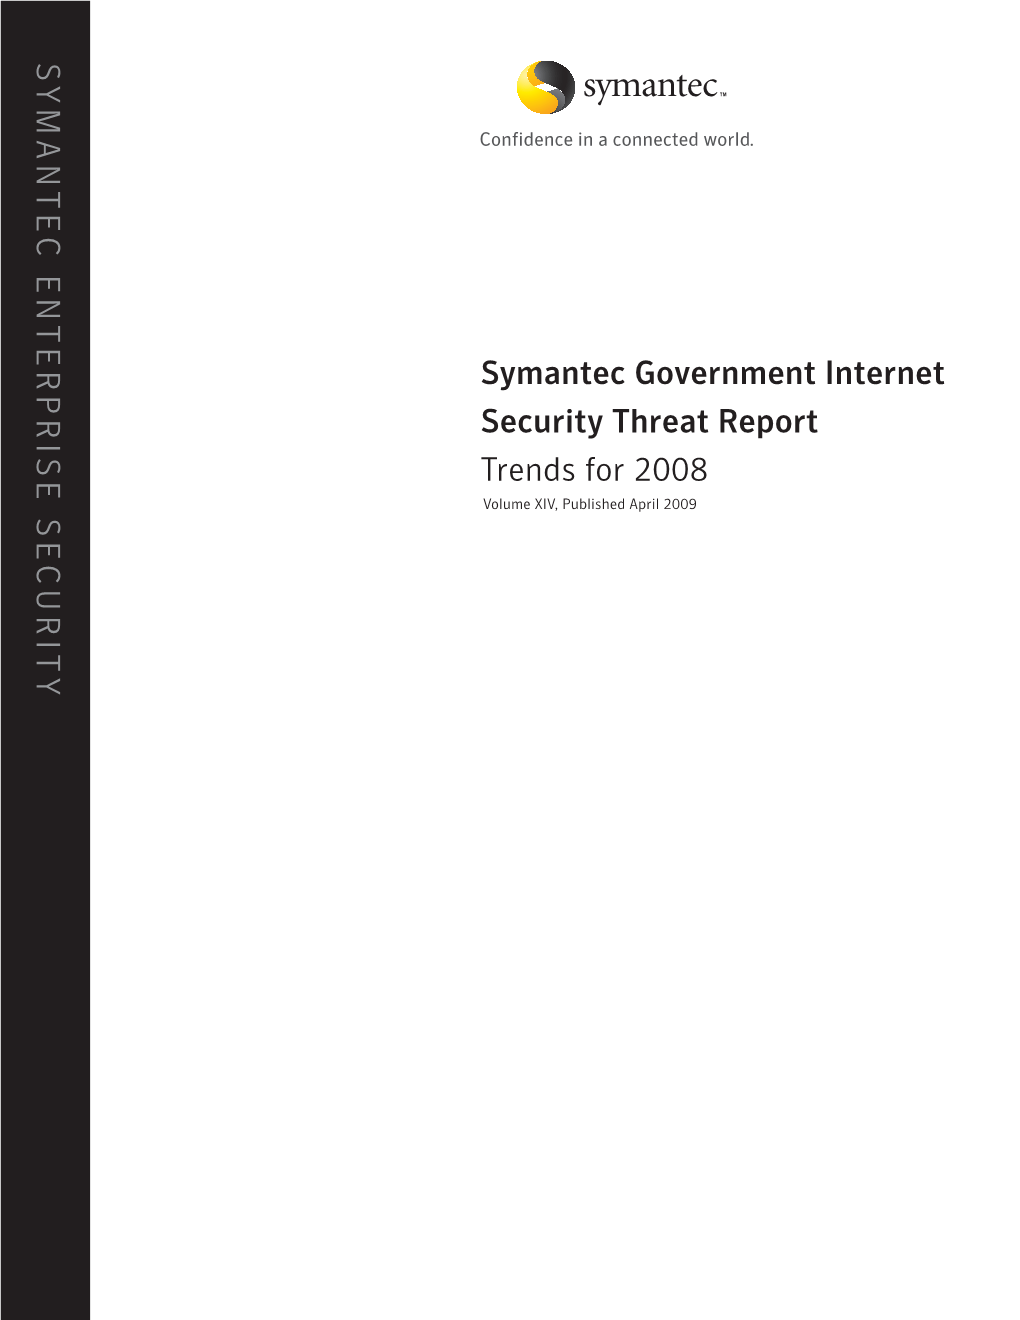 Symantec Government Internet Security Threat Report Trends for 2008